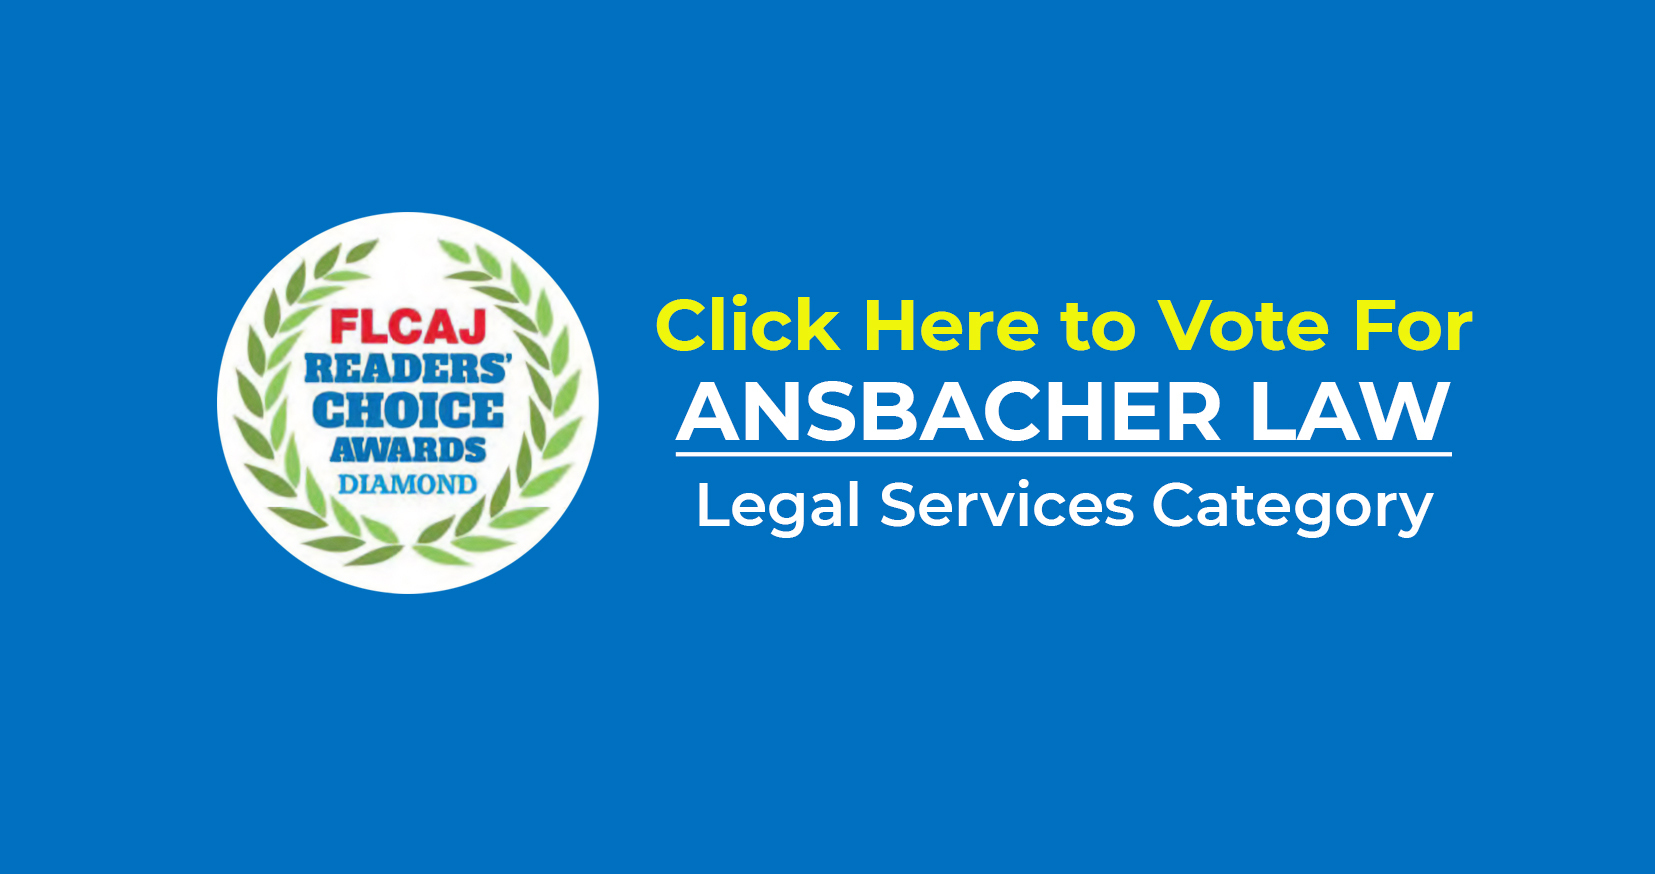 Blue banner with text "click here to vote for Ansbacher Law Florida Community Association legal services category" and a circular logo for the "Readers' Choice Awards Diamond.